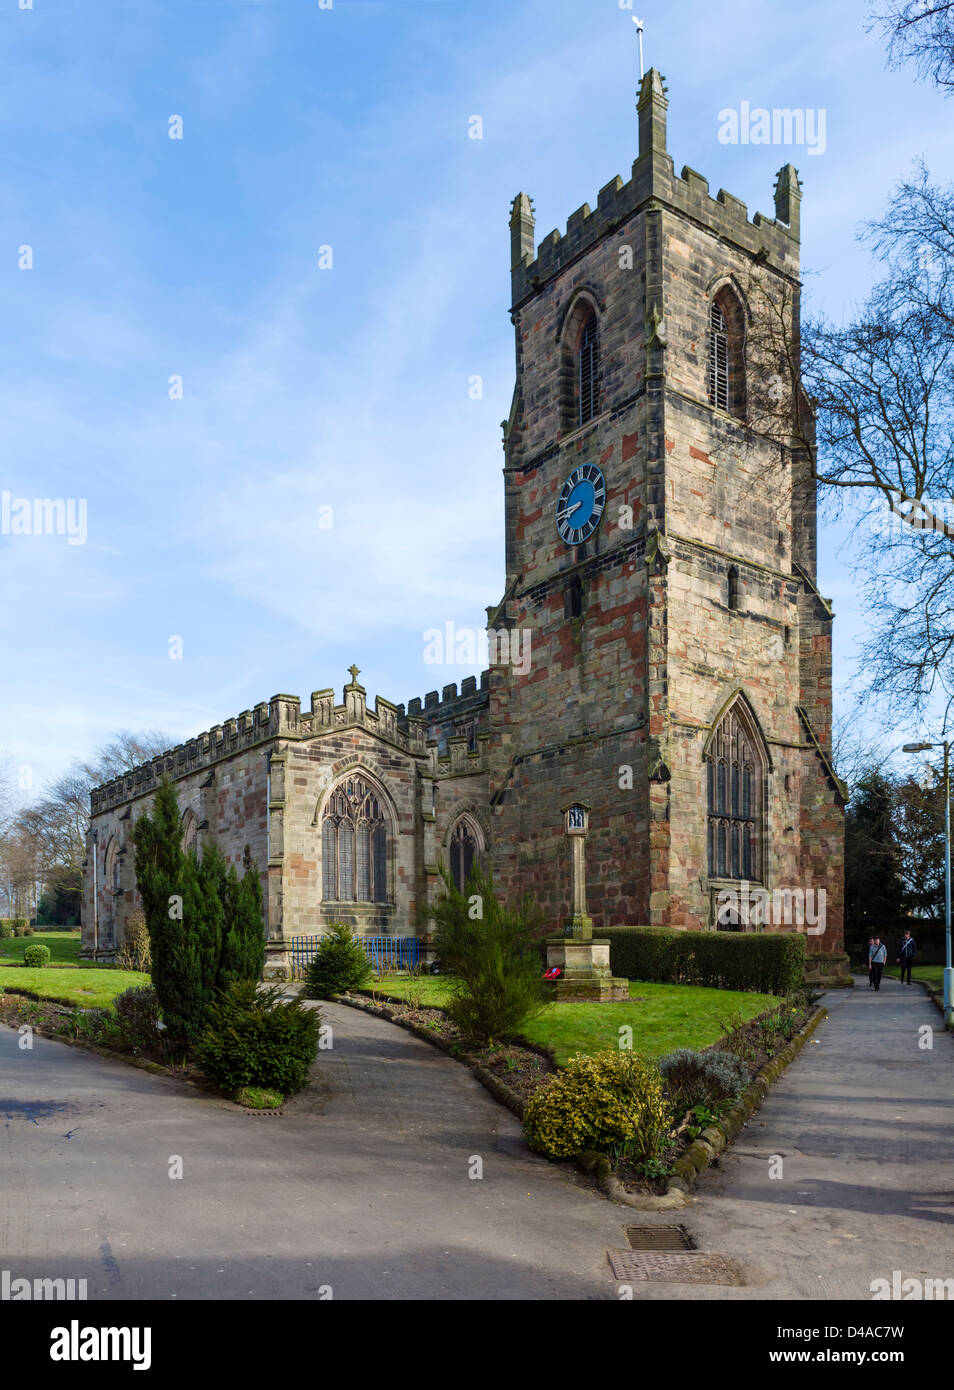 The Parish Church of St Helen, Ashby-de-la-Zouch, Leicestershire, East Midlands, UK Stock Photo